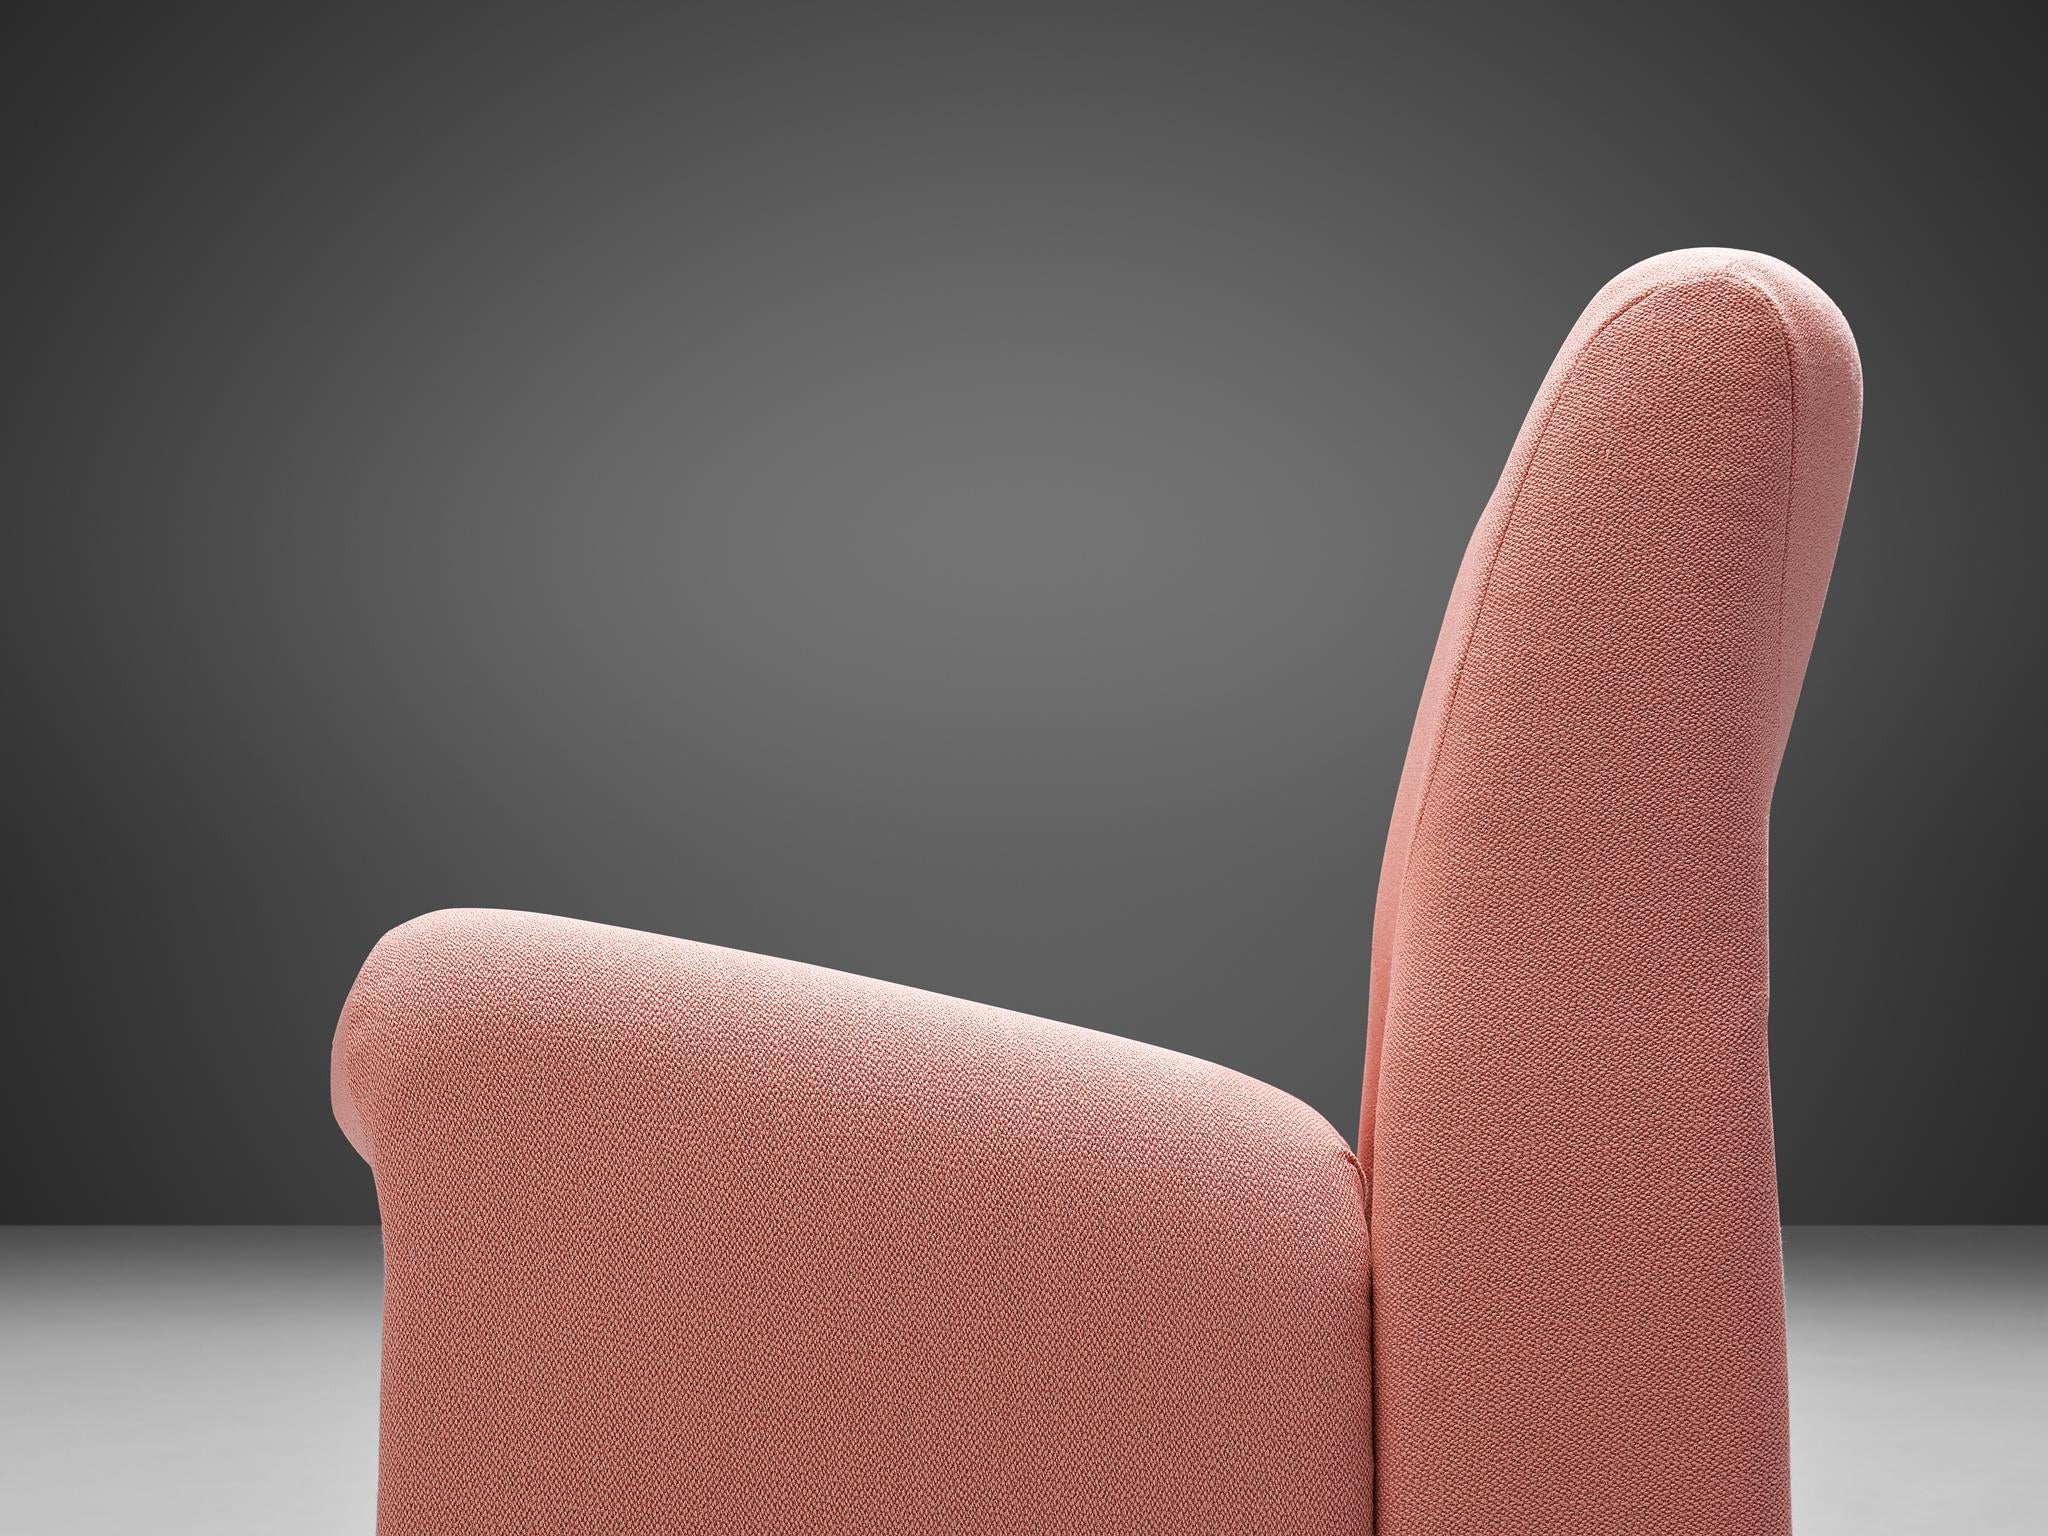 ‘Alky’ Lounge Chairs in the Style of Giancarlo Piretti